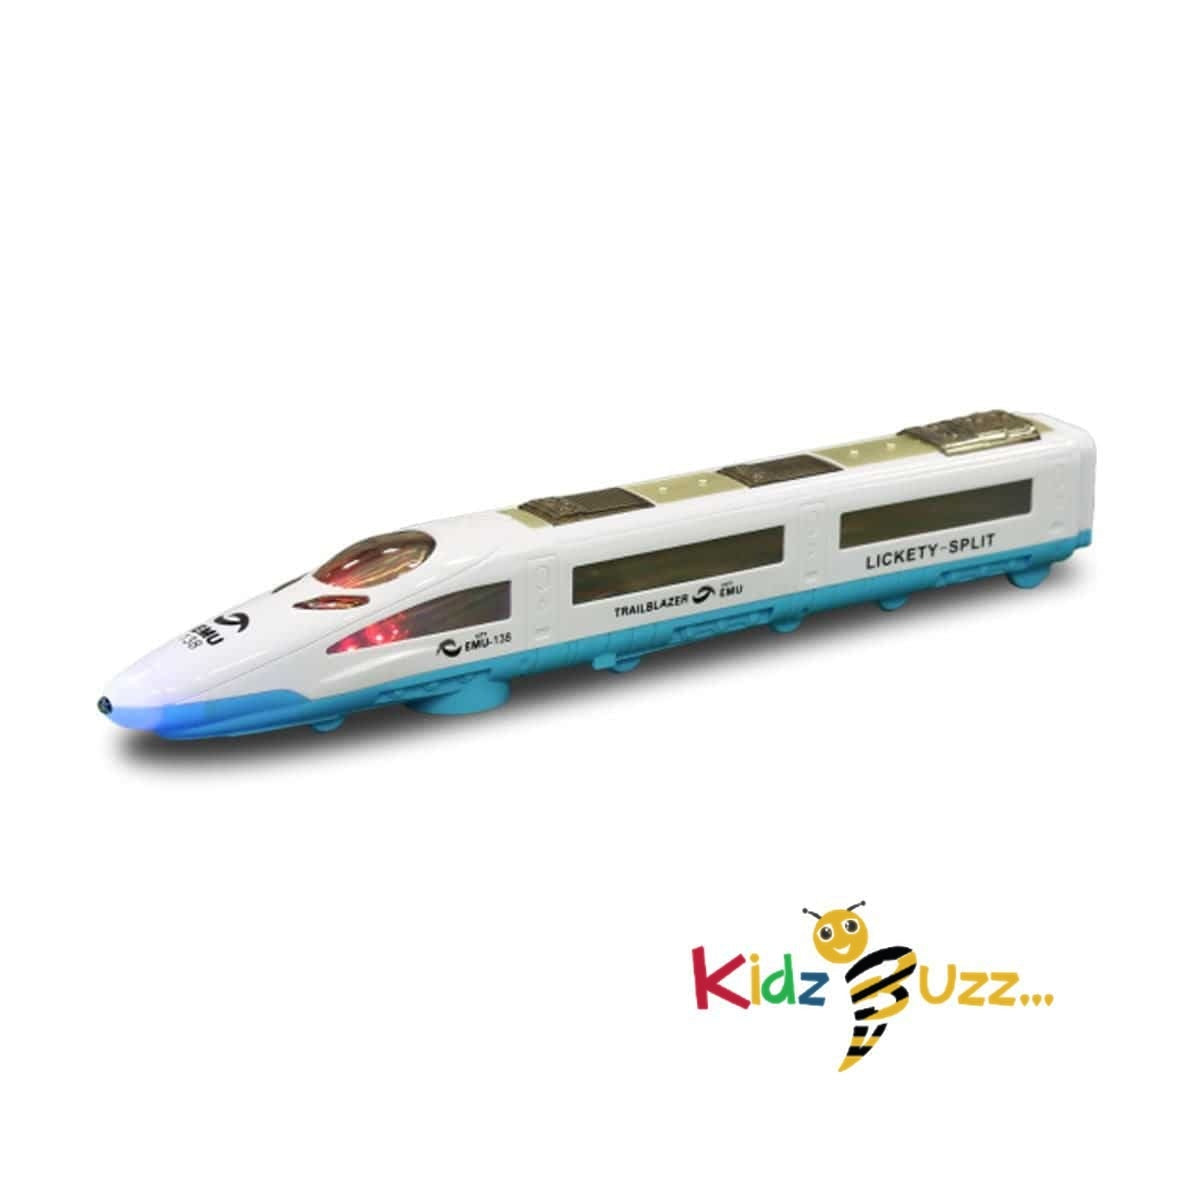 Metro Bullet Train Toy for Kids Lights & Musical Sound Toy for Boys and  Girls (Speed Train)